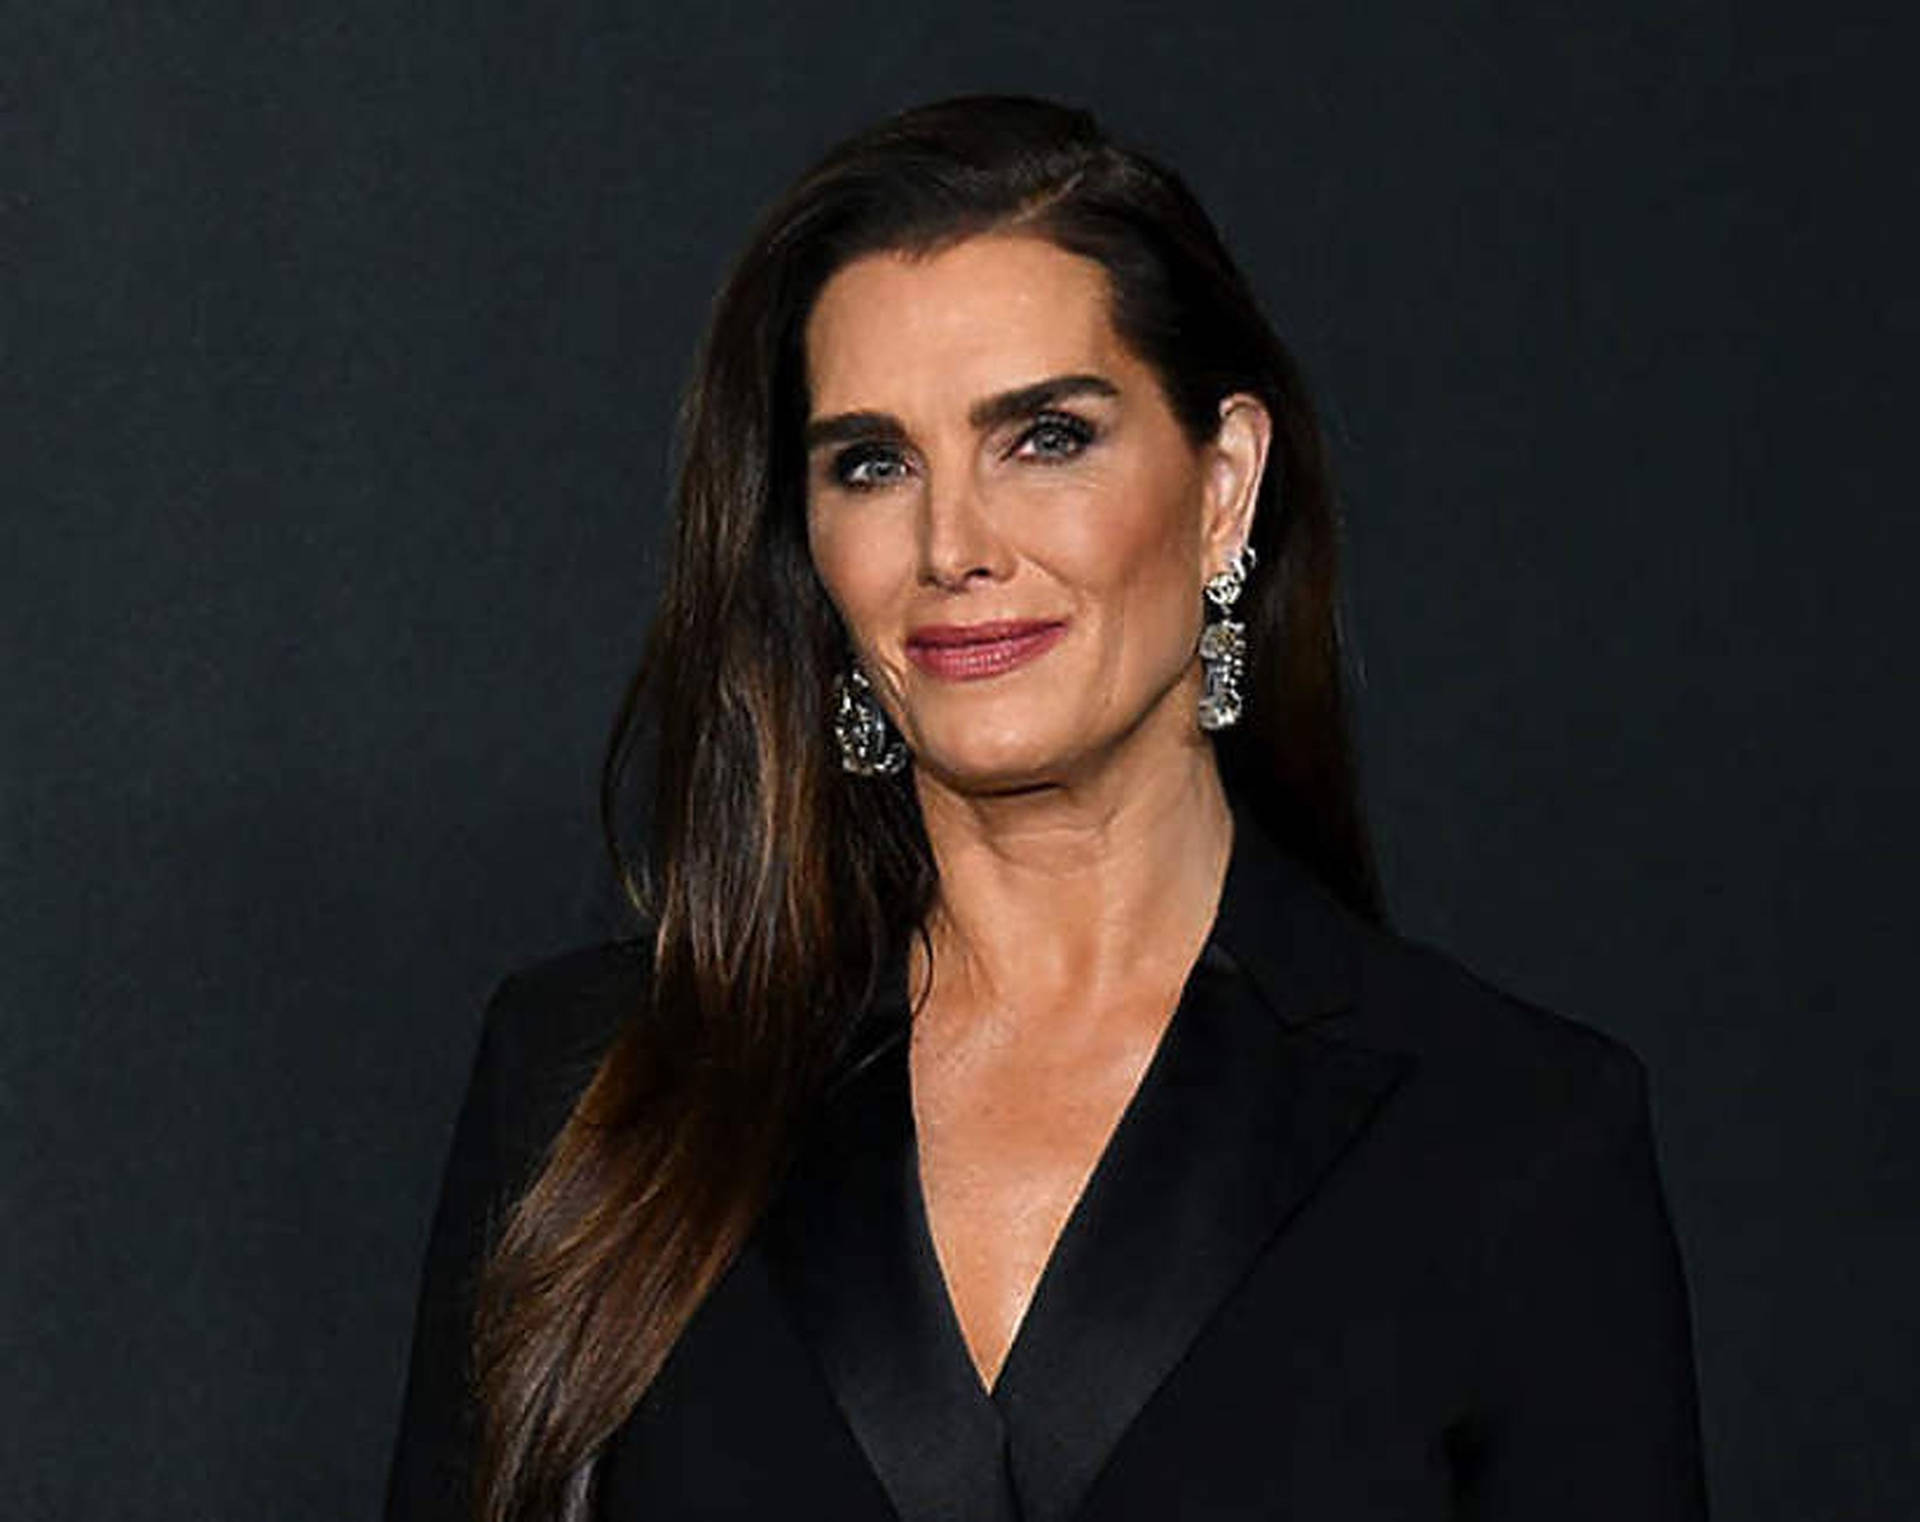 Brooke Shields In Black Outfit